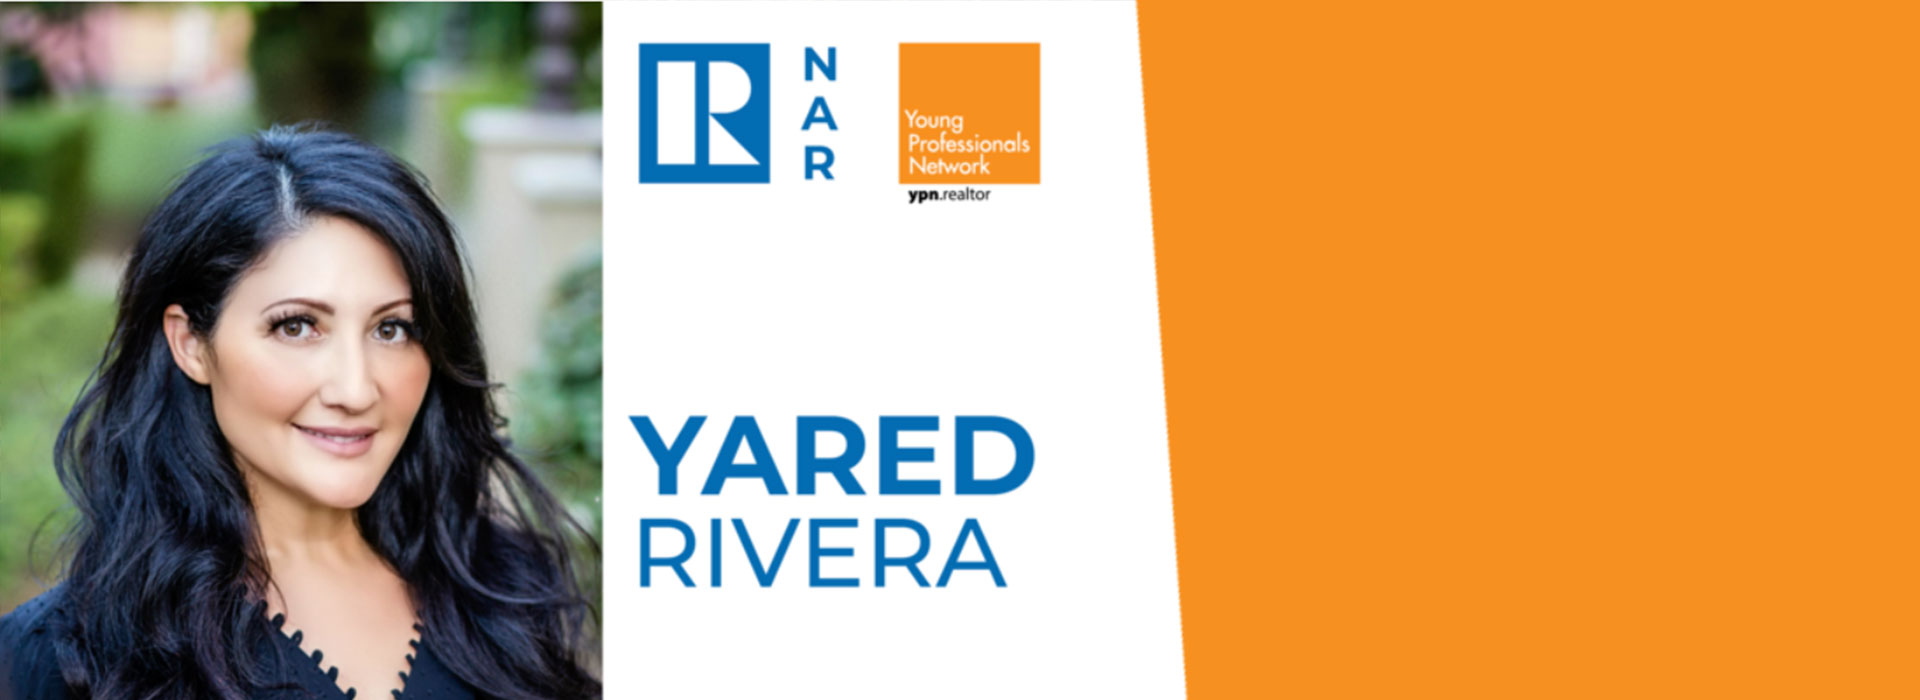 Podcast Features Yared Rivera, NAR YPN